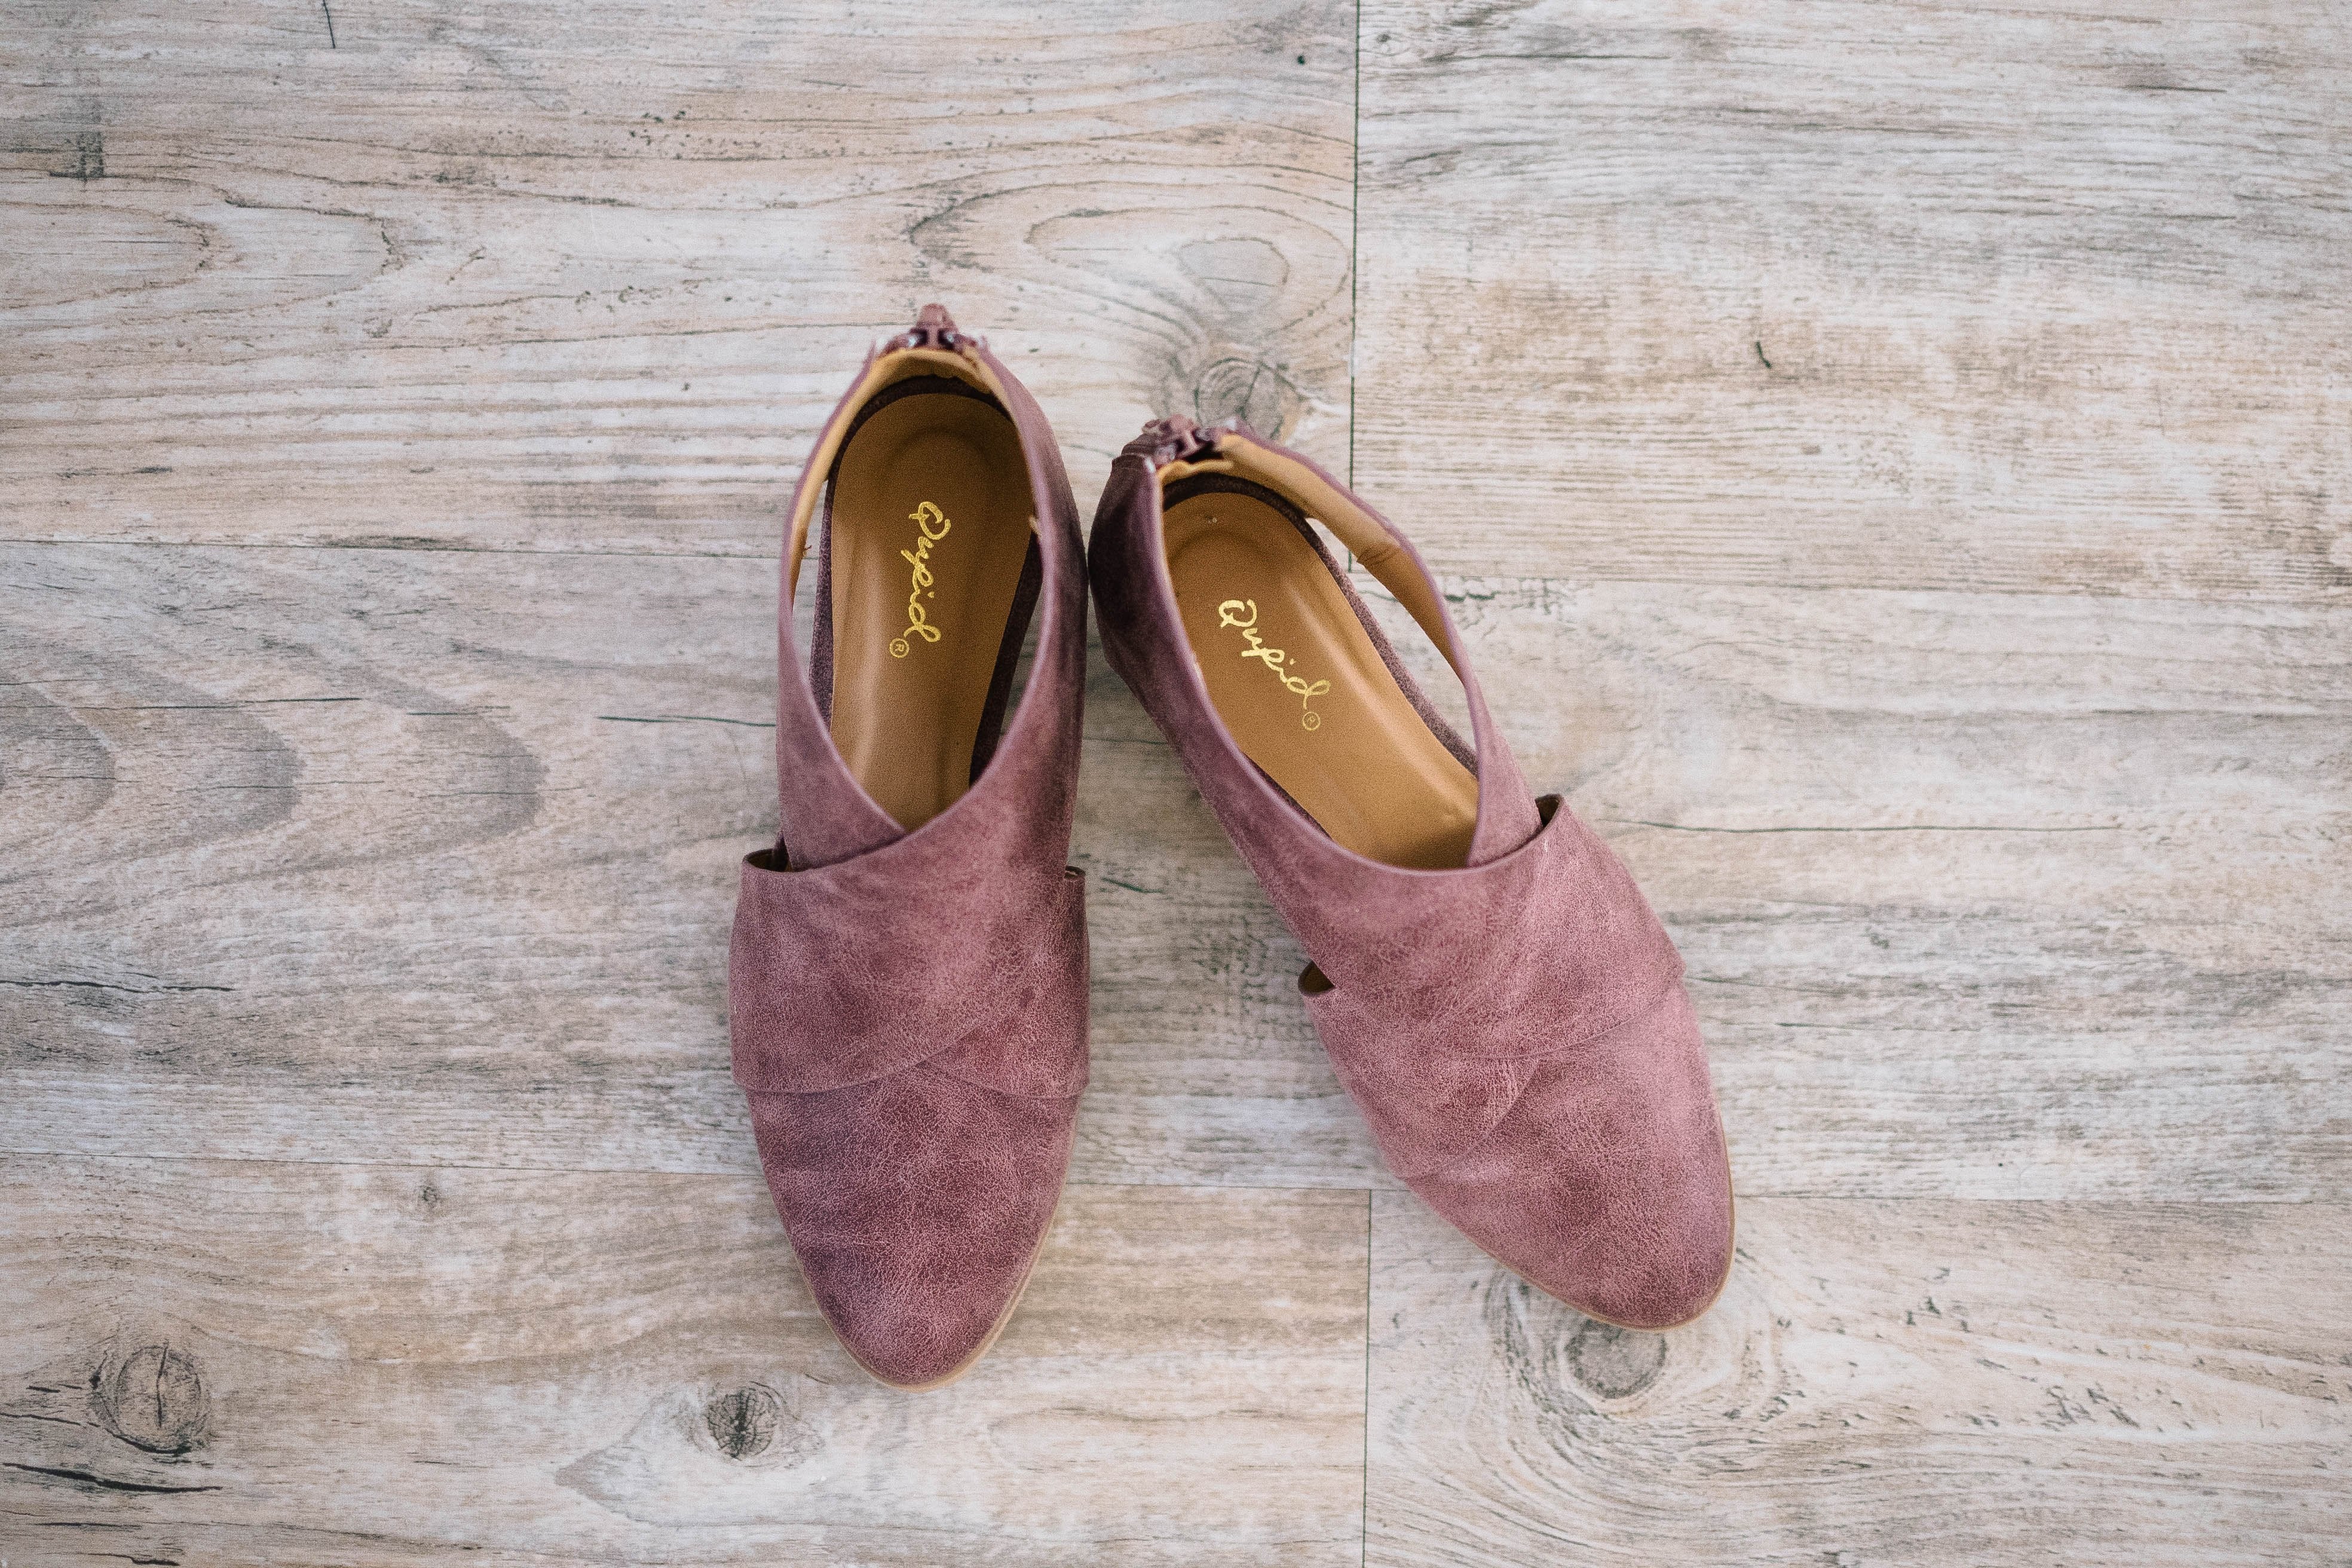 Distressed Side Cutout Booties in Rose Taupe